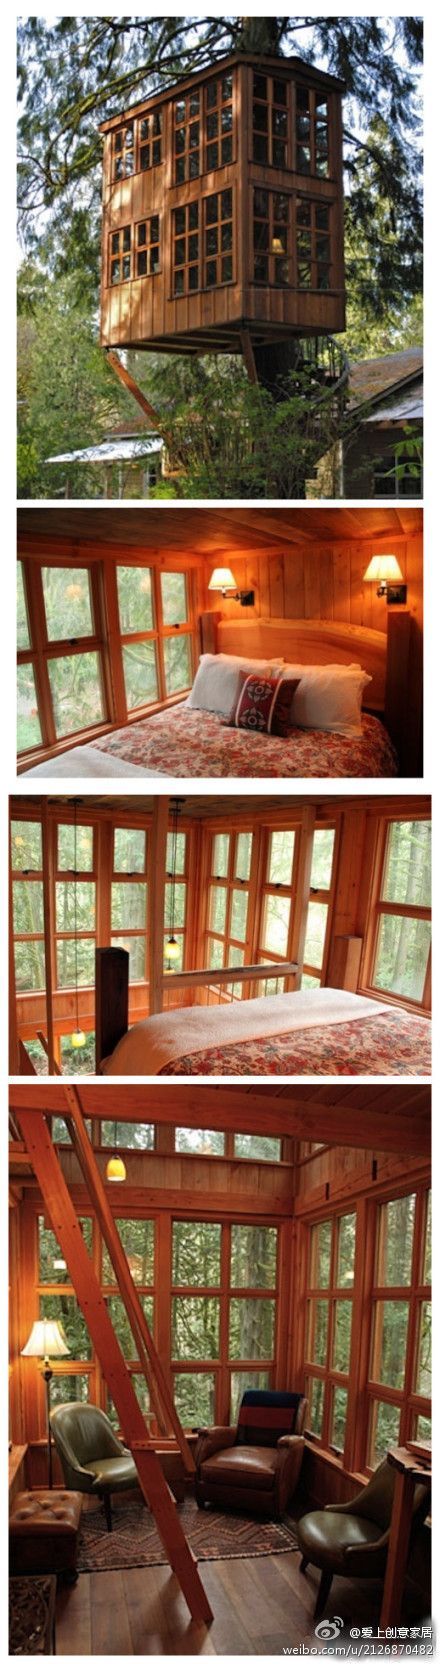 guest tree house. This is awesome.